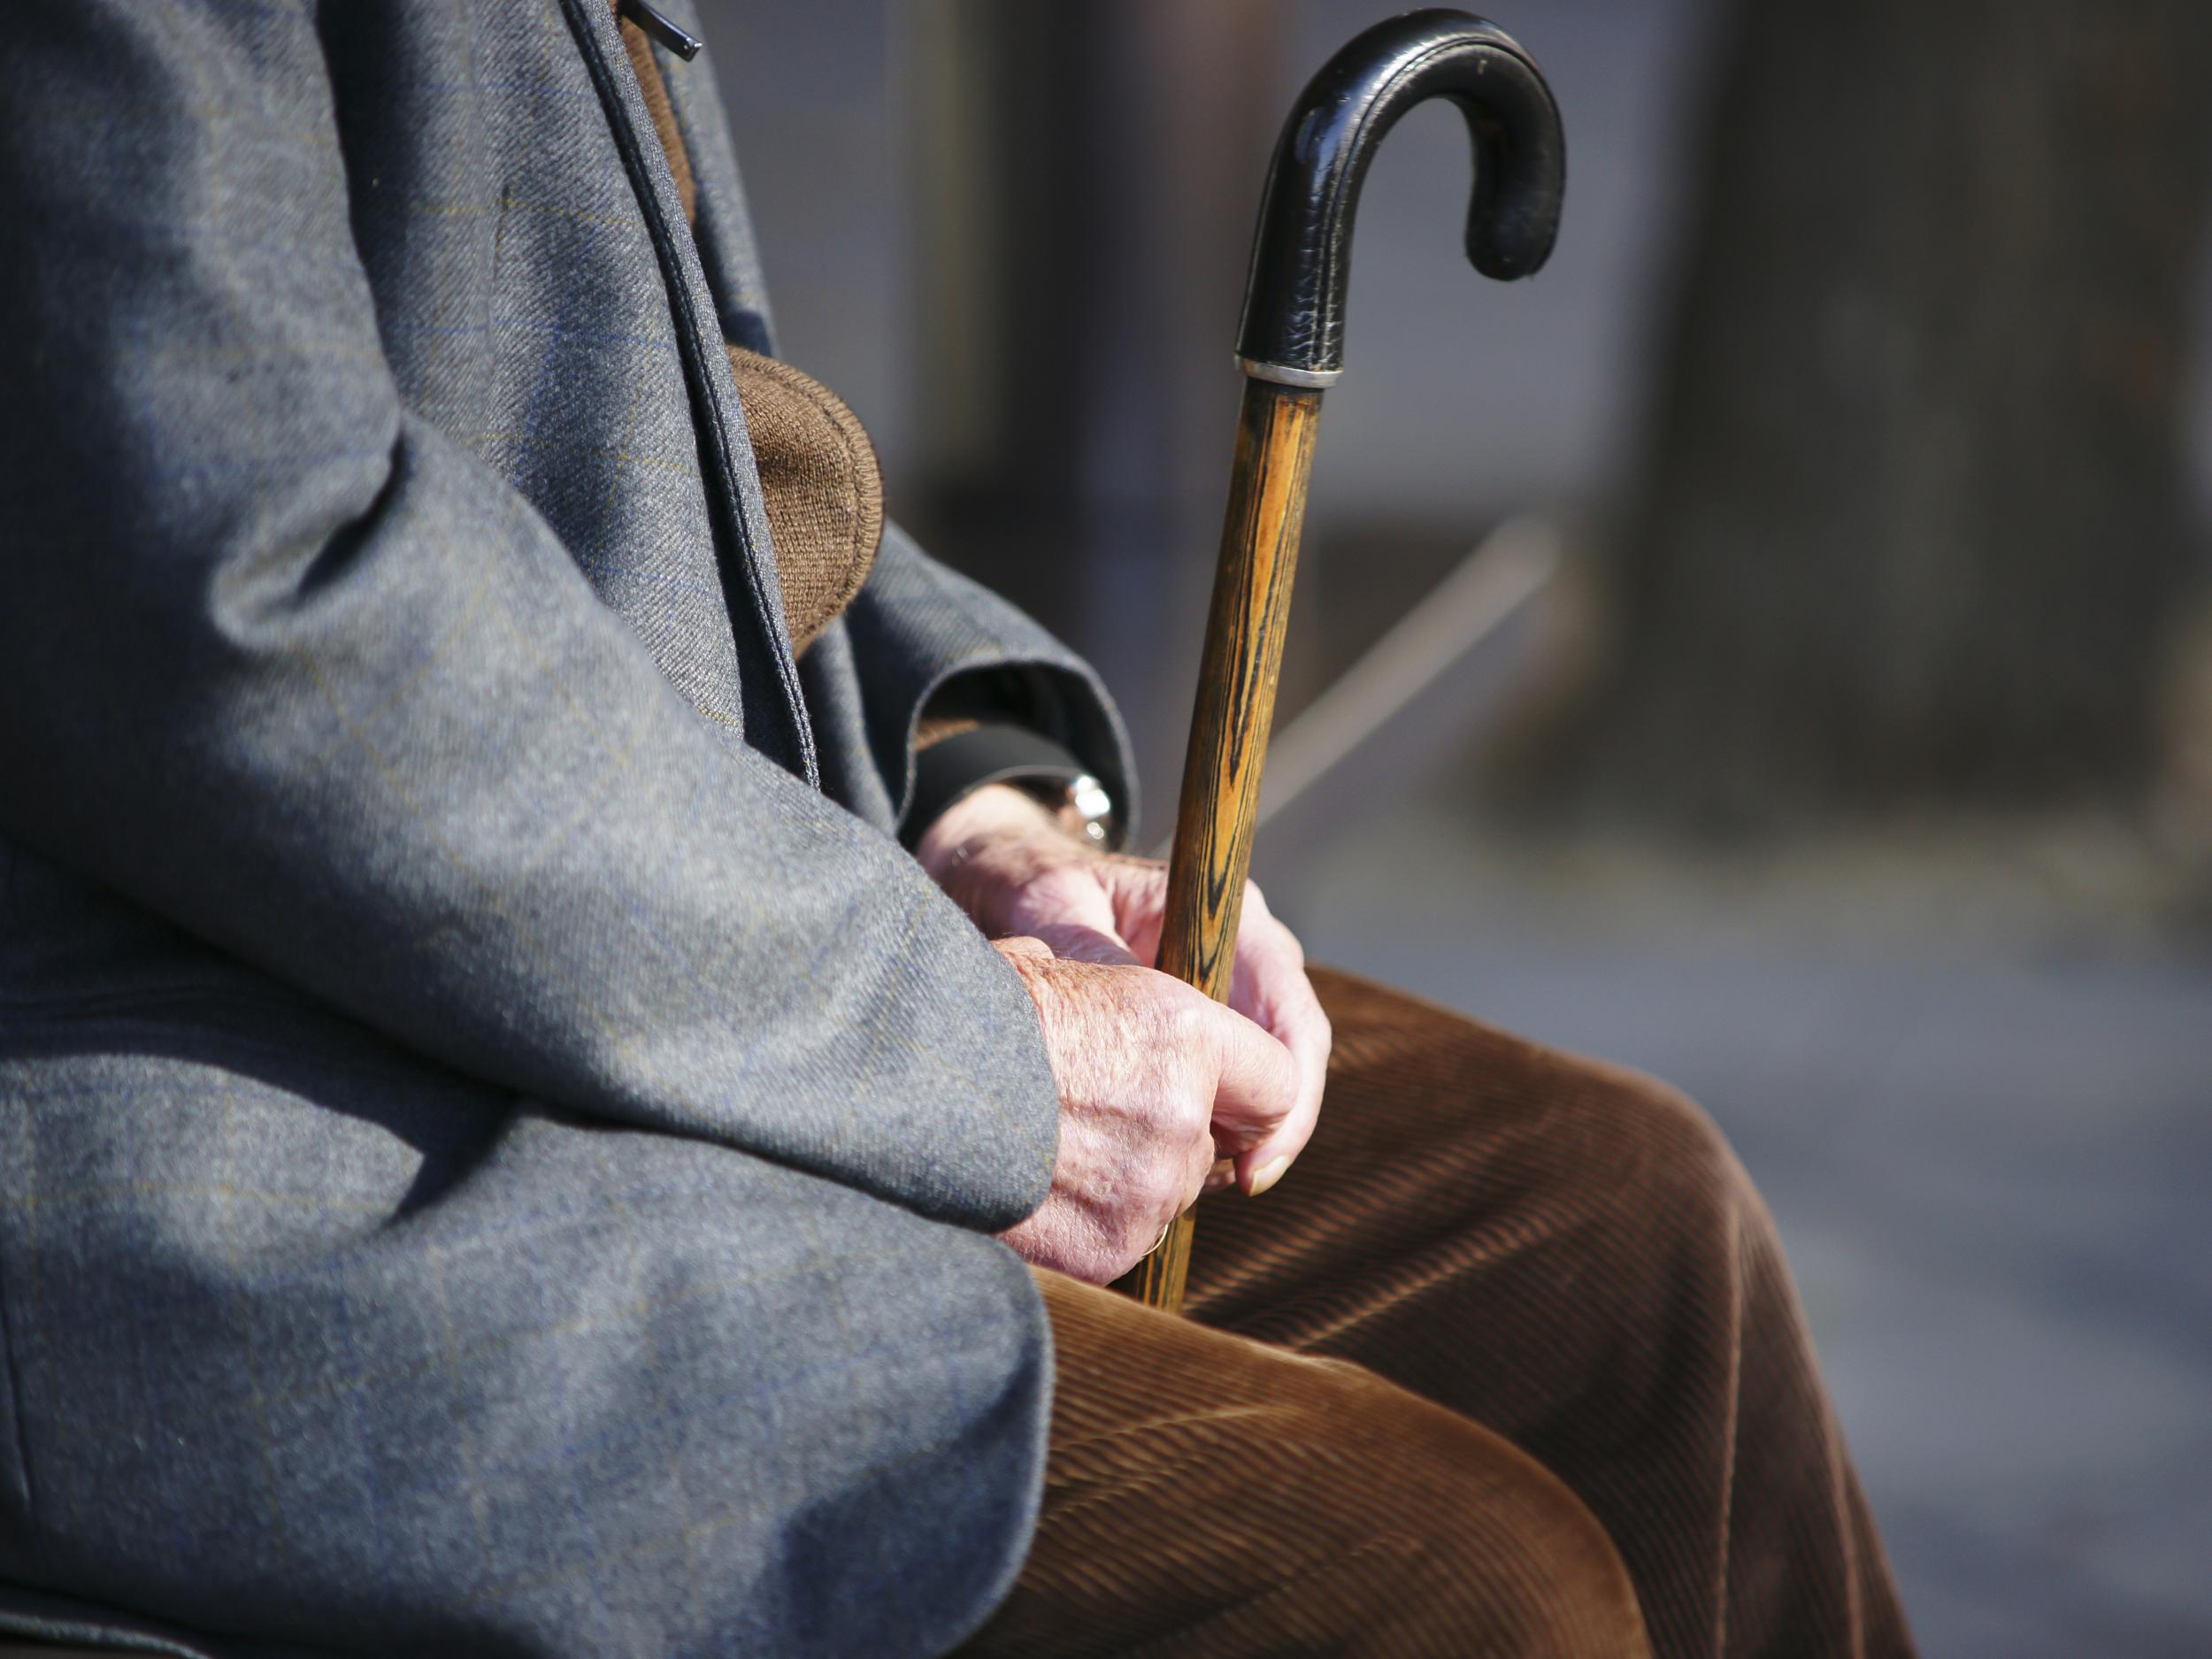 One study of 85-year-olds found a median number of five diseases per person